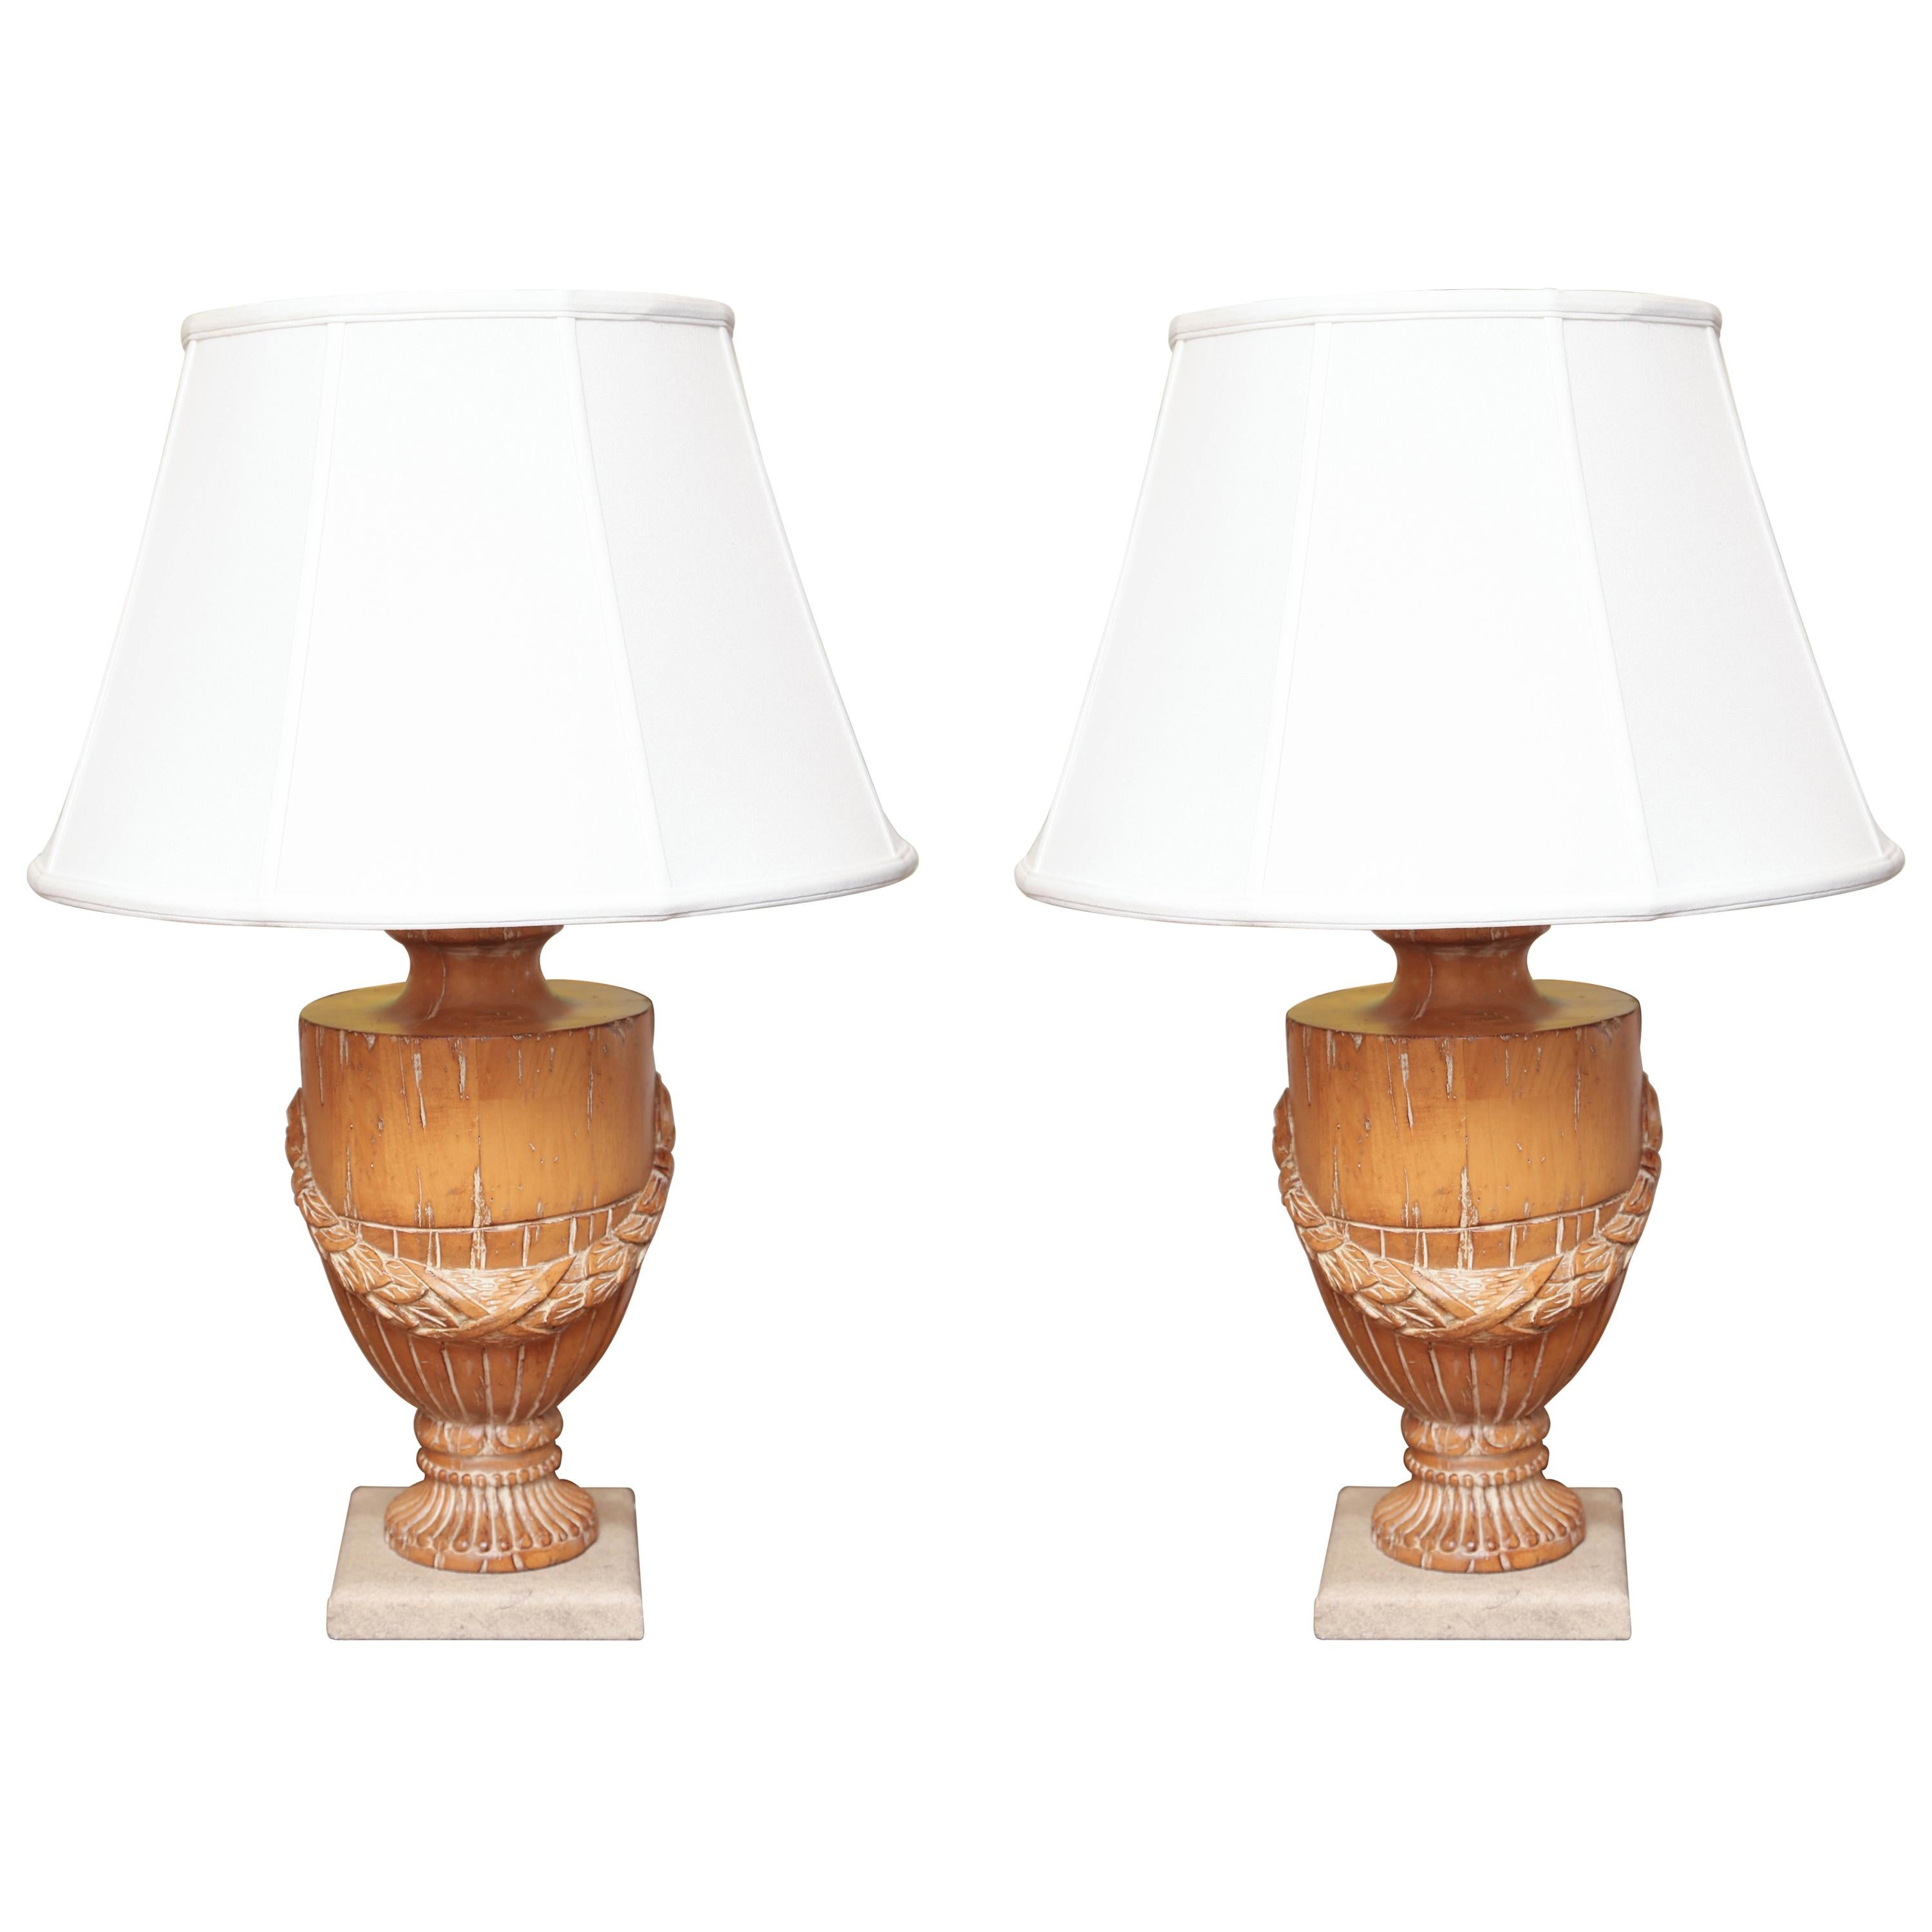 Pair of Carved Solid Wood Urns Mounted as Lamps